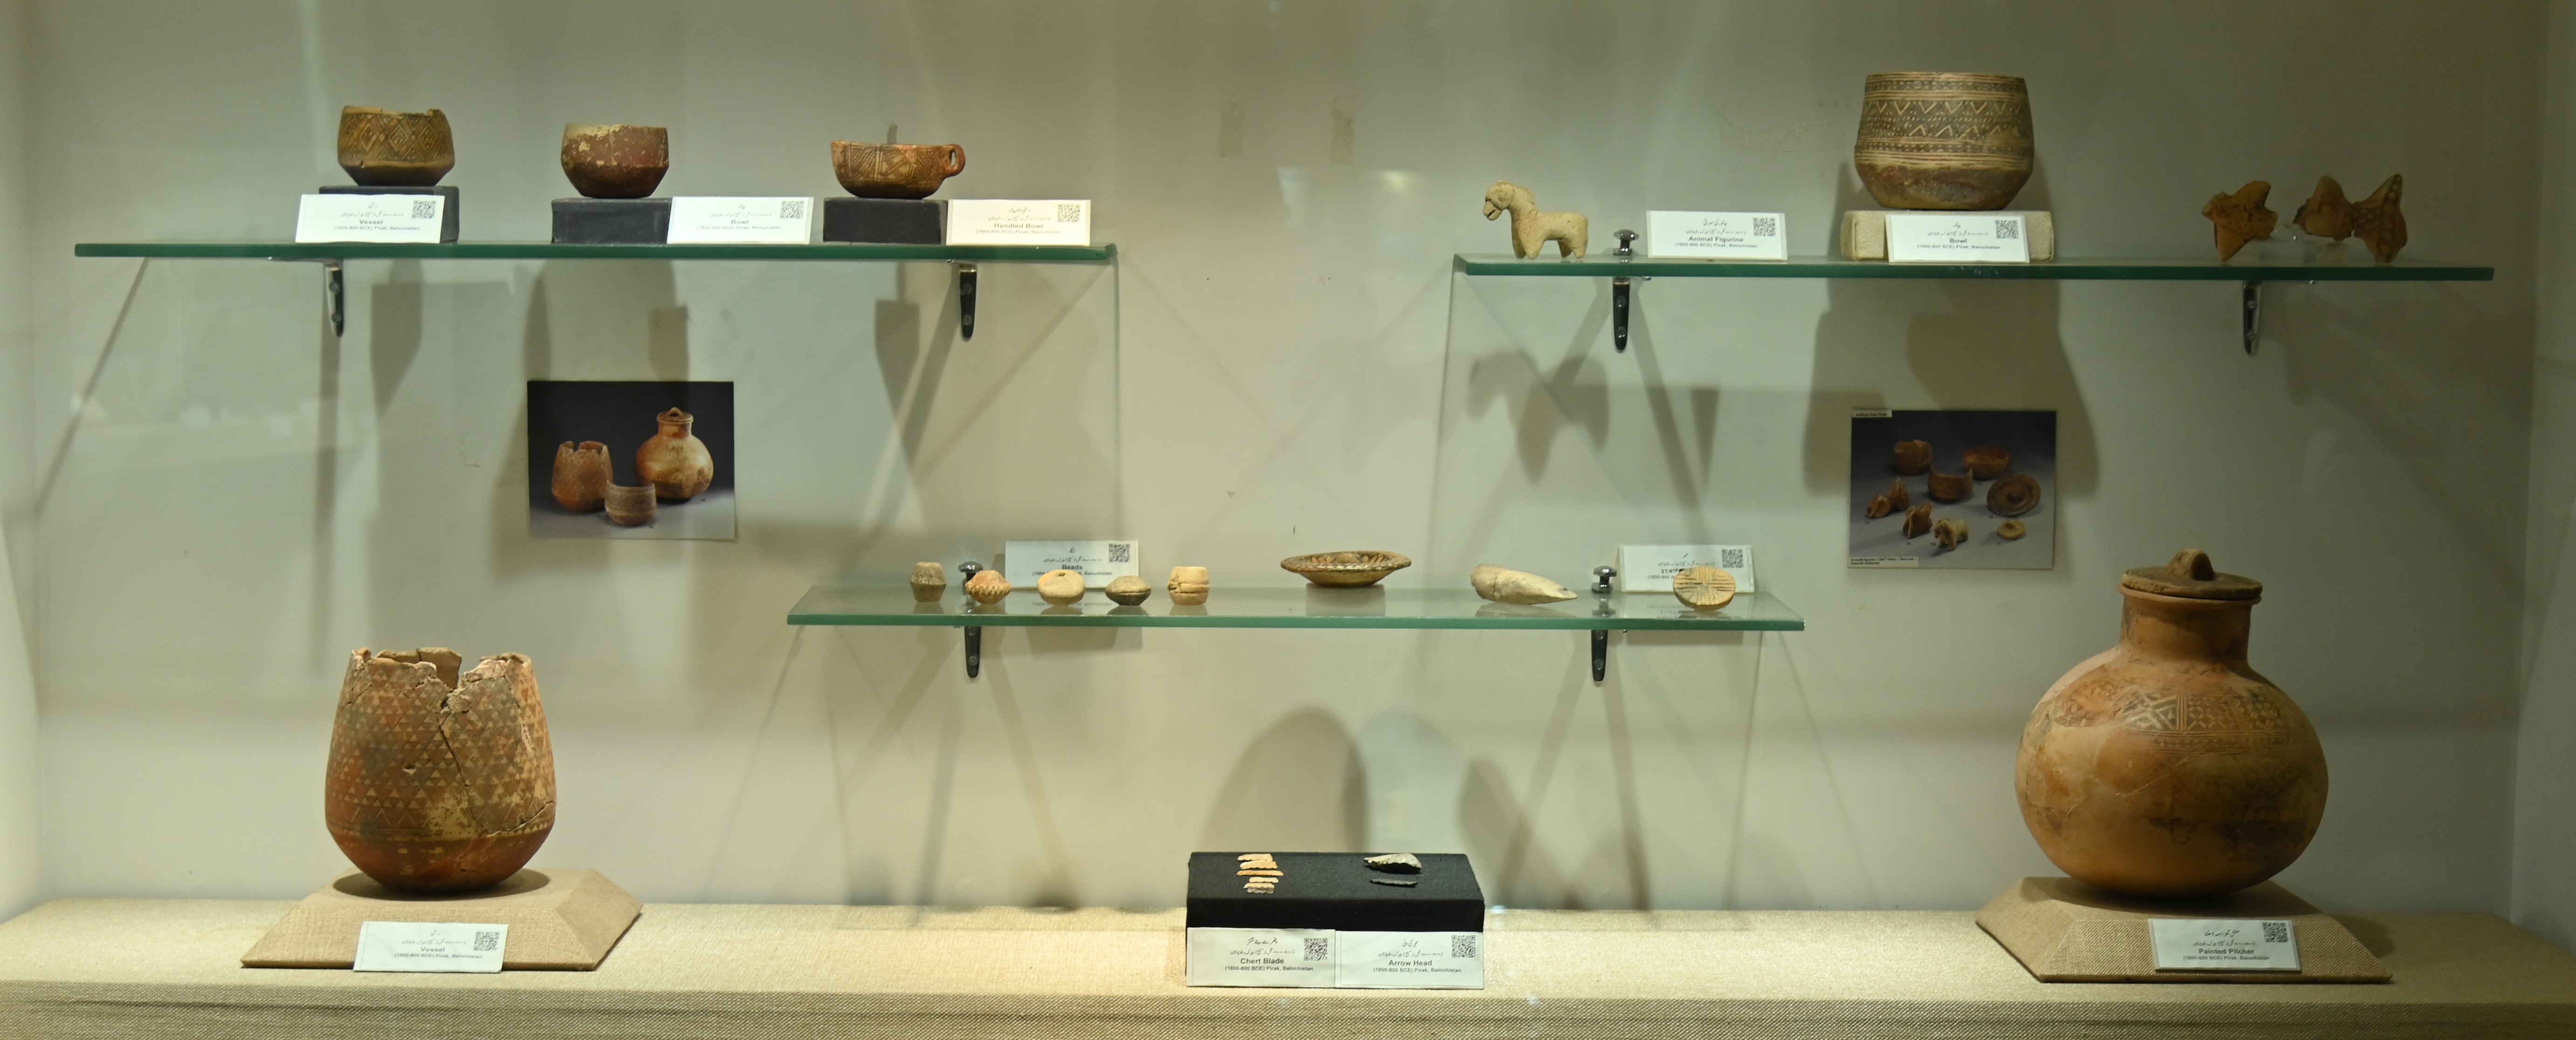 The collection of Pottery, Beads, Chert Blade, and Arrow head preserved at Sir Syed Memorial Museum